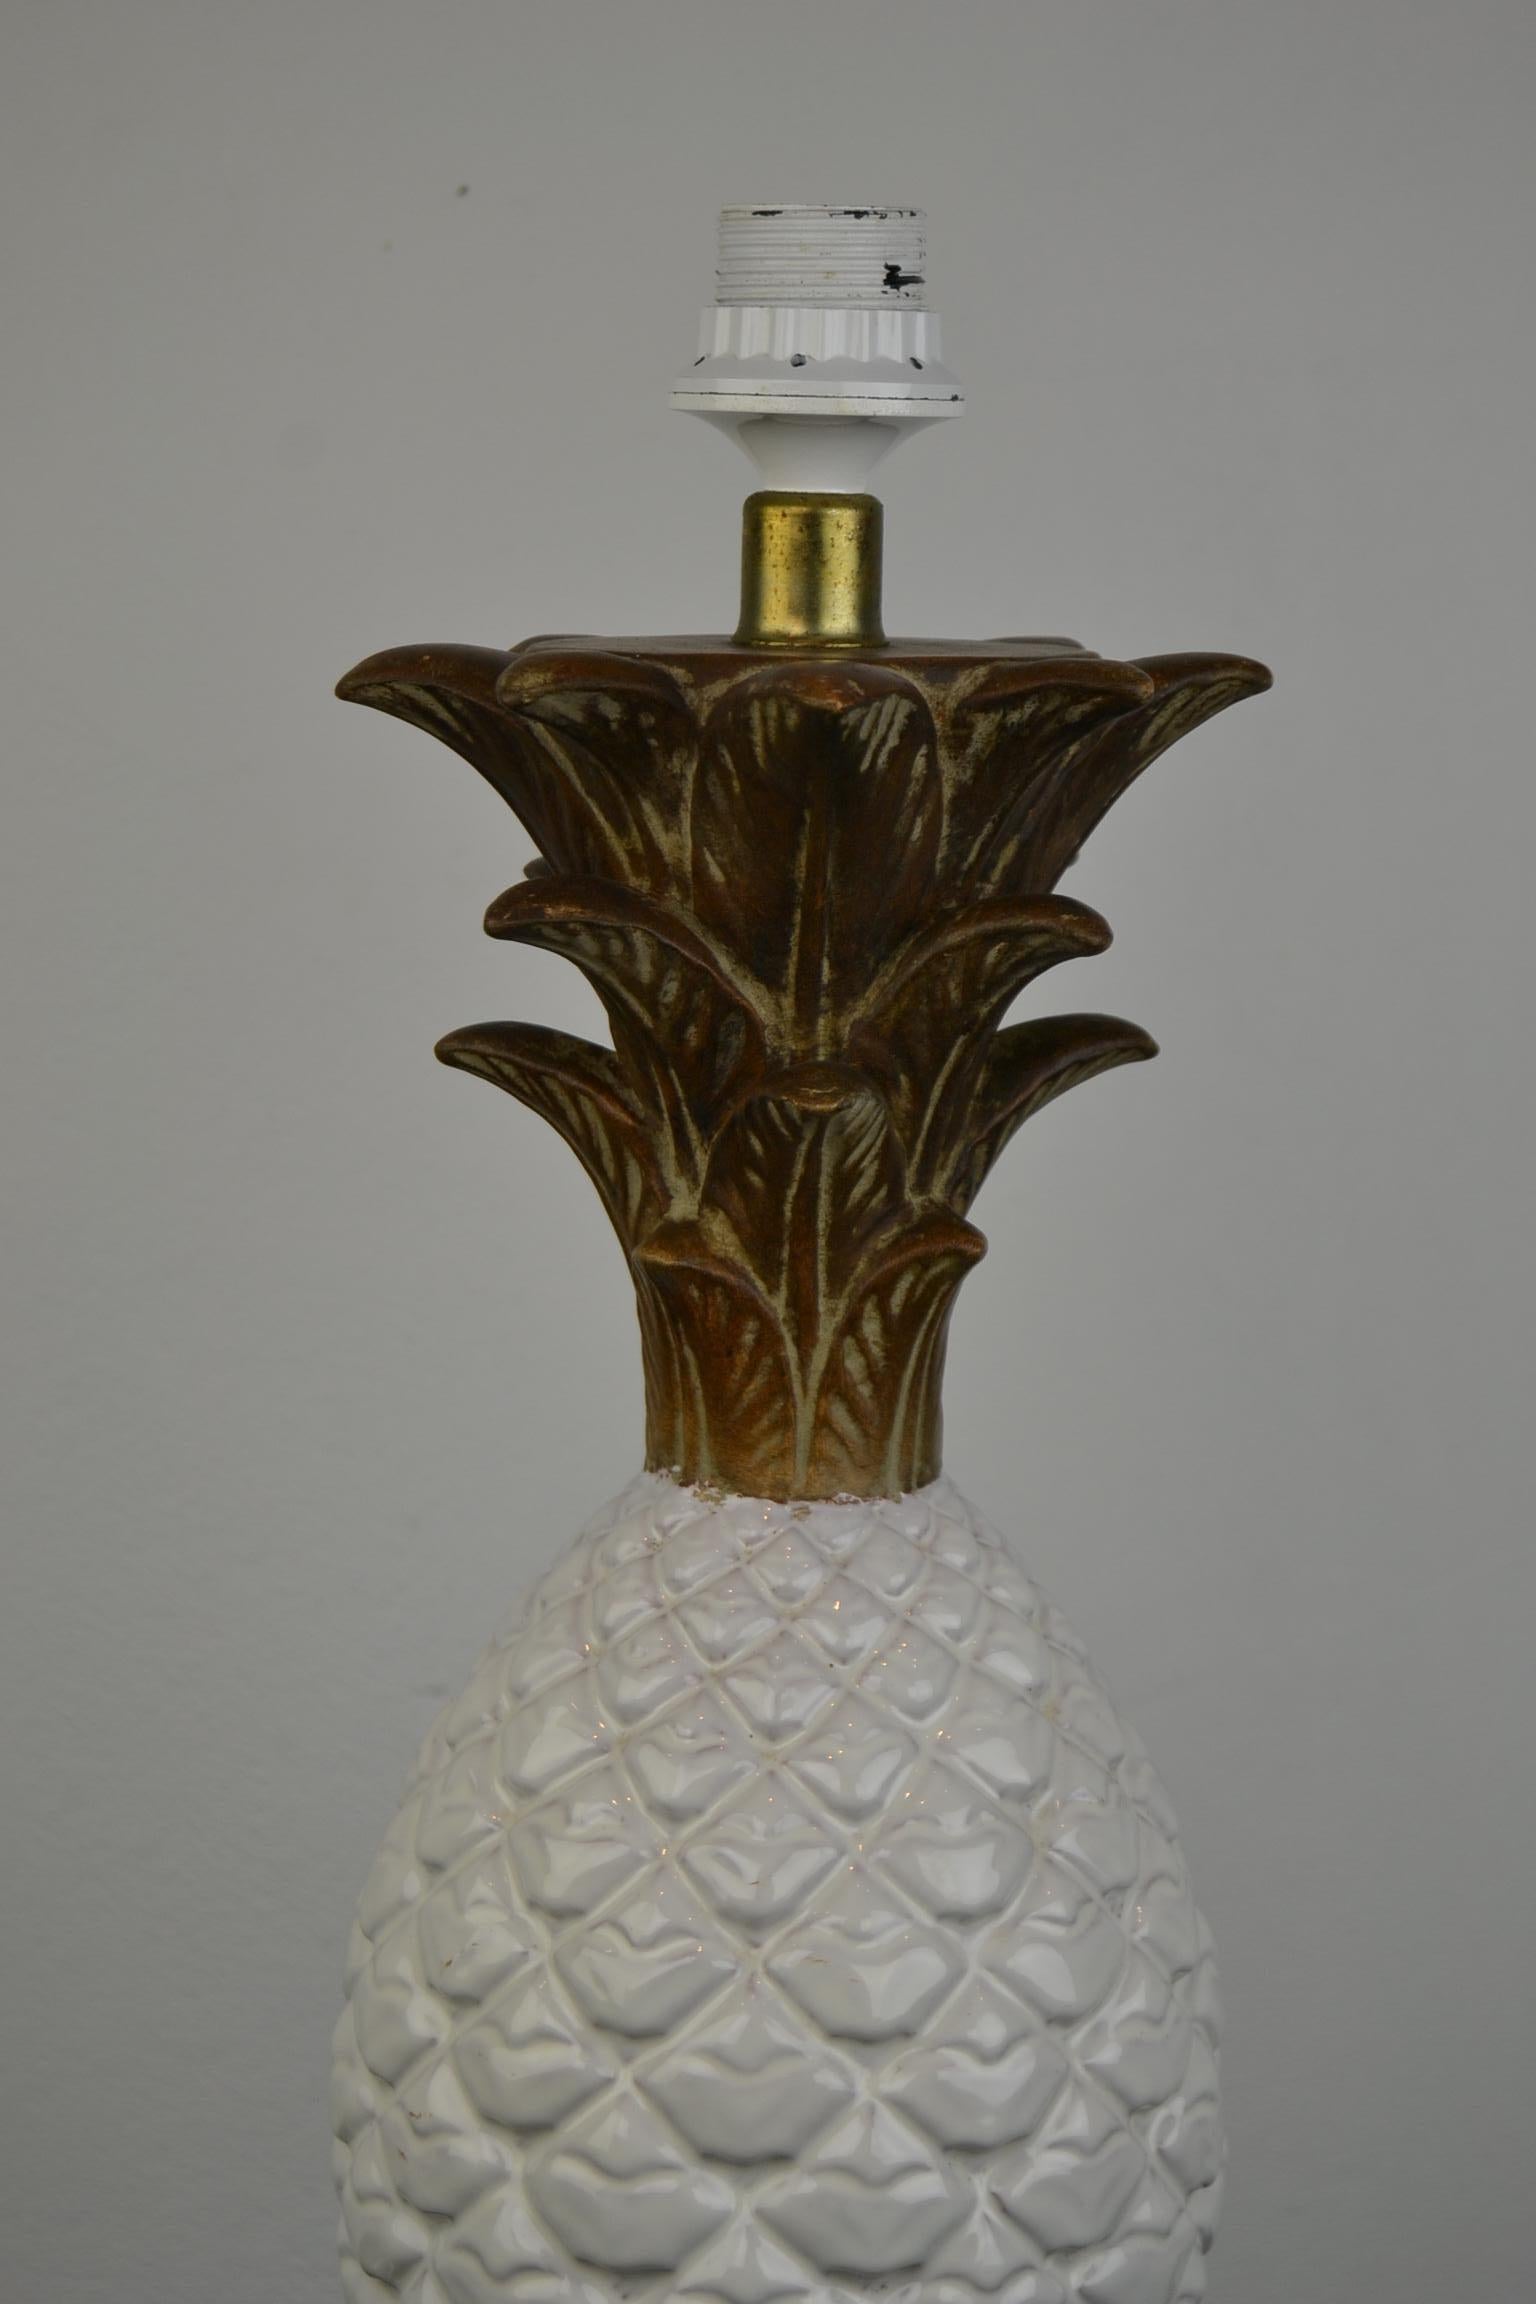 Zaccagnini Ceramic Pineapple Table Lamp, Italy, 1960s For Sale 5